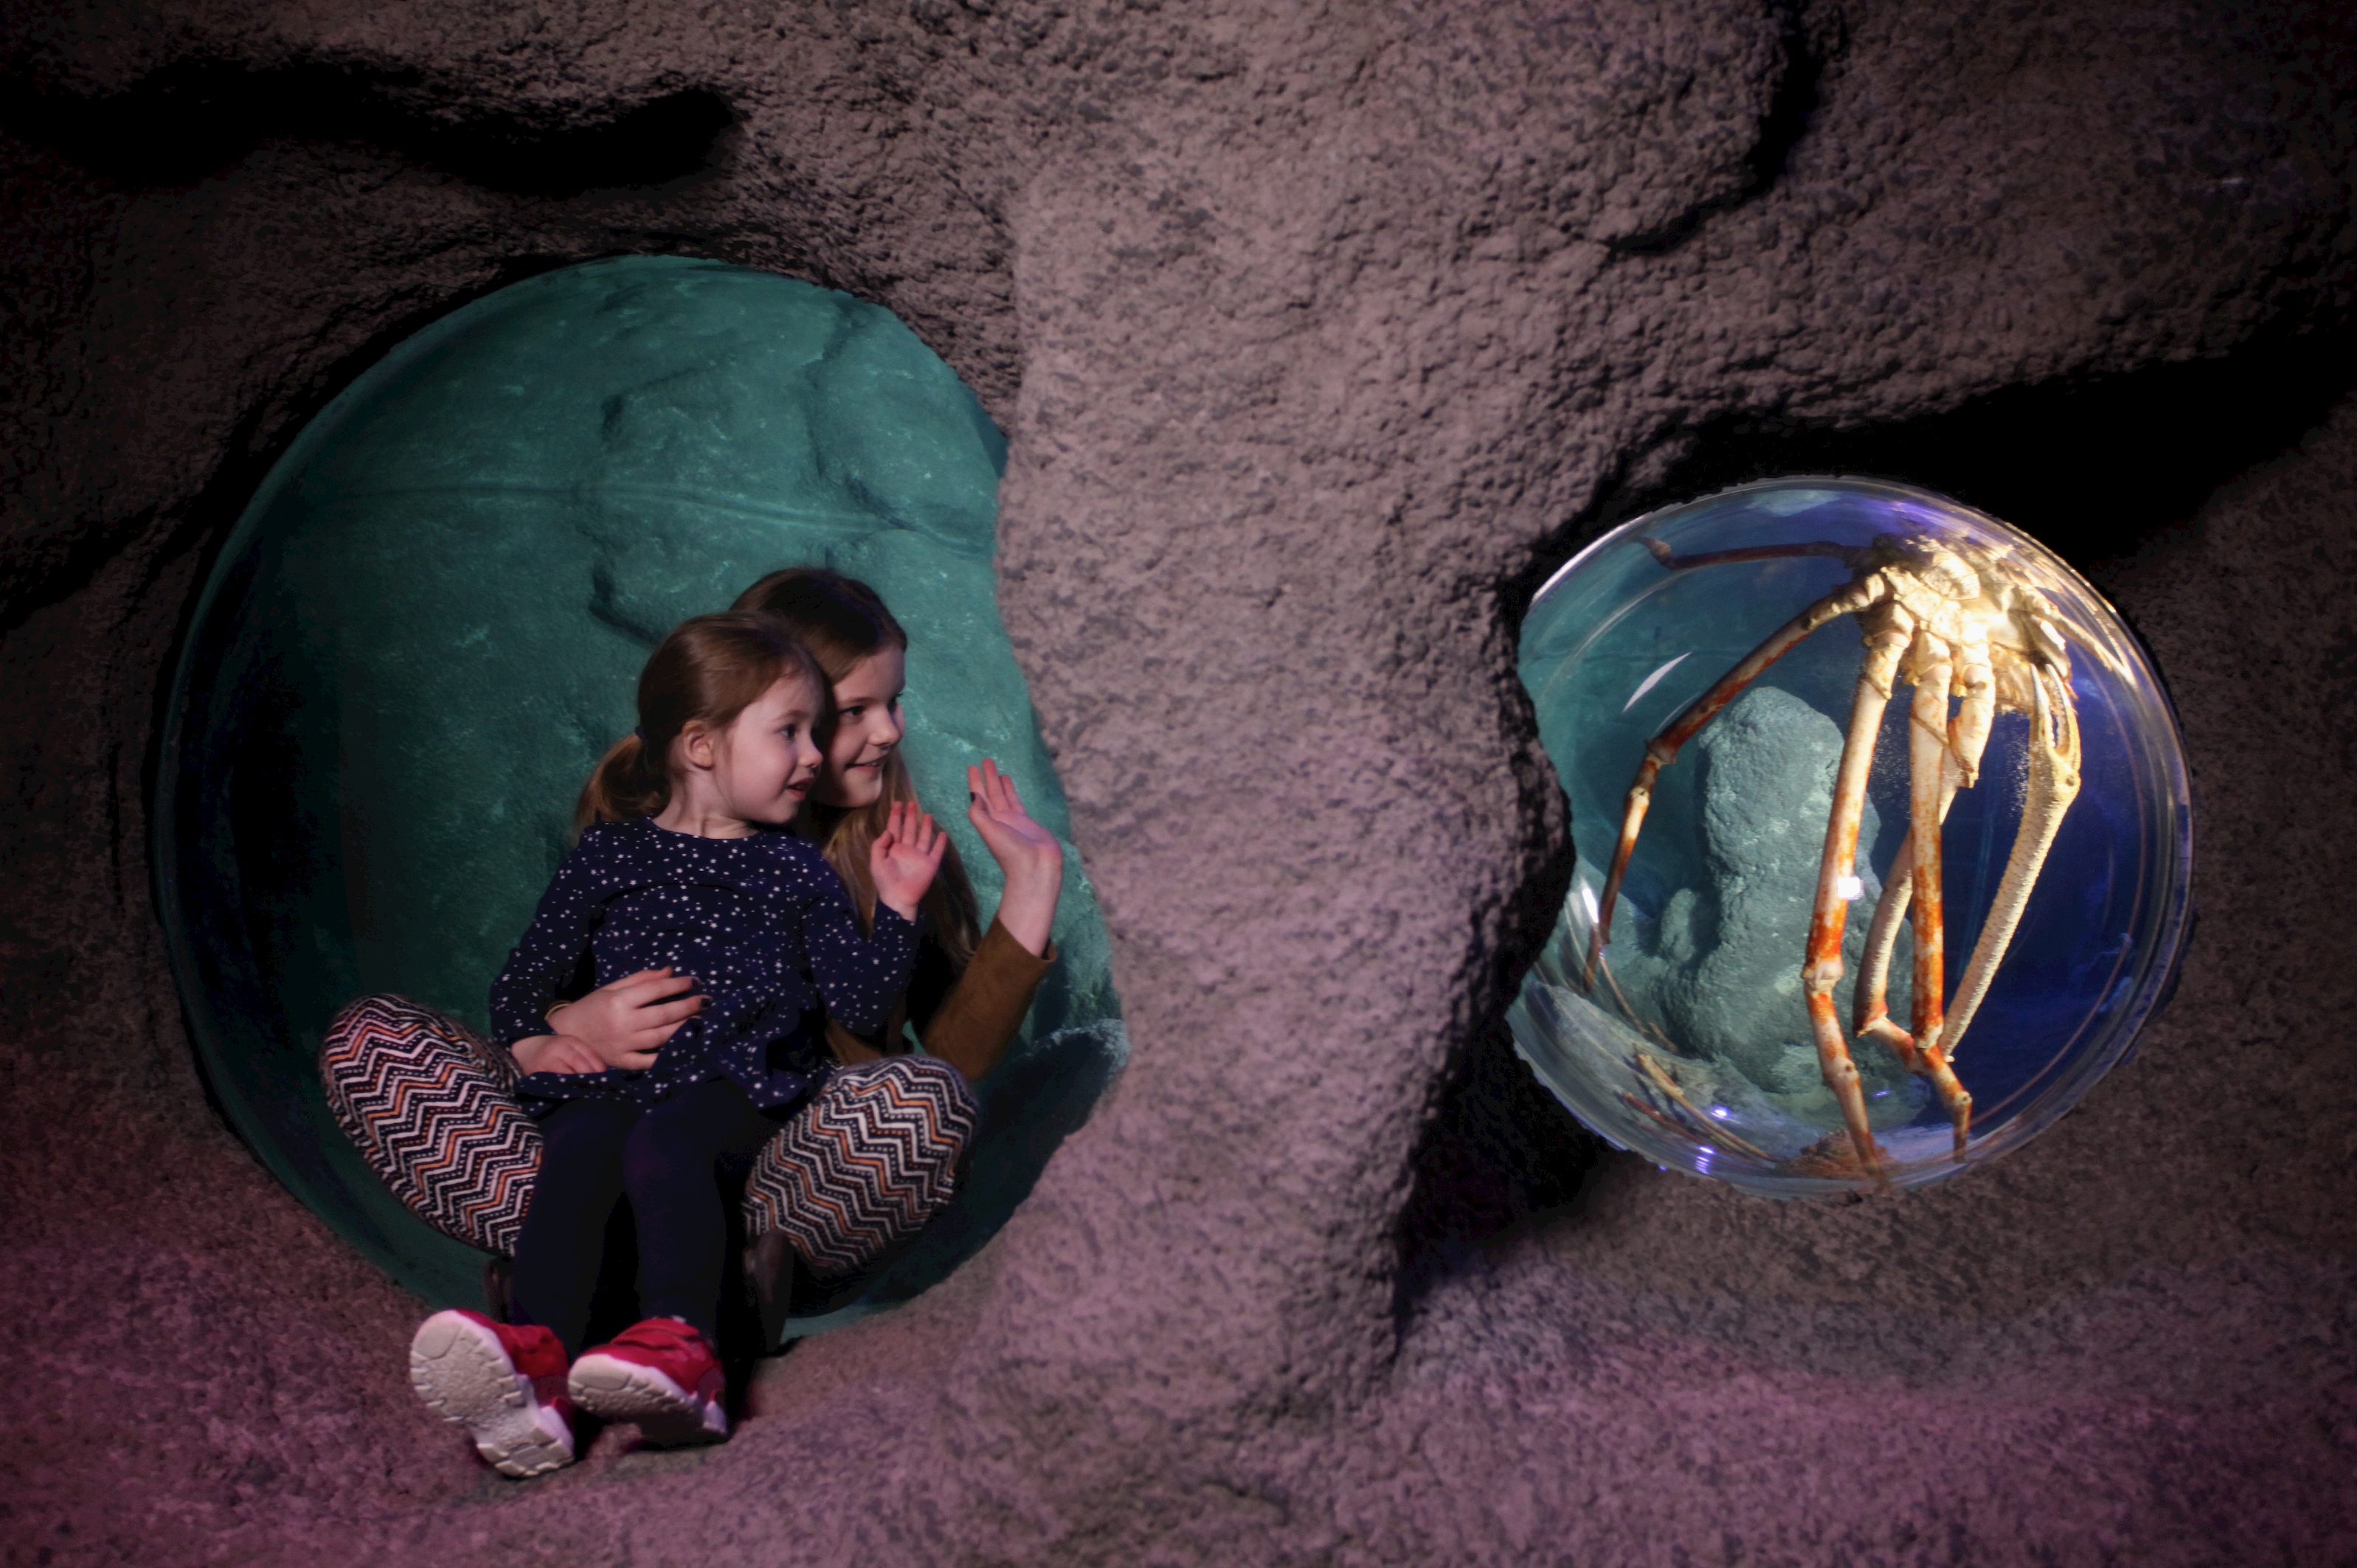 Children at the Giant Crab zone at SEA LIFE Manchester